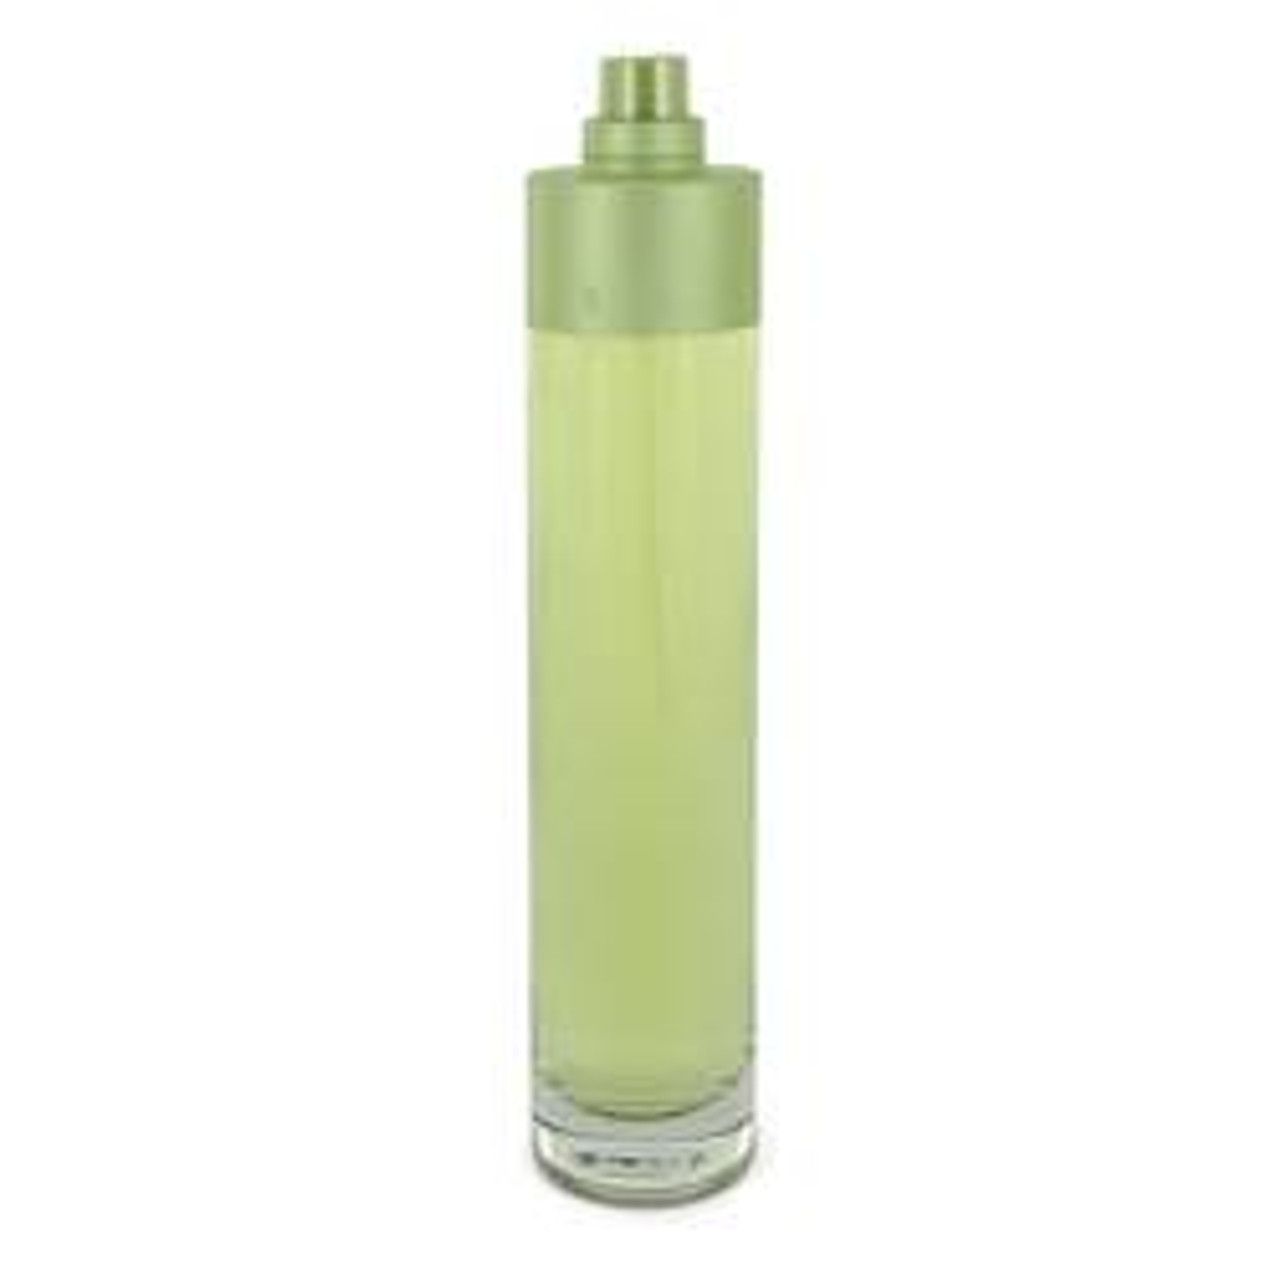 Perry Ellis Reserve Perfume By Perry Ellis Eau De Parfum Spray (Tester) 3.4 oz for Women - [From 63.00 - Choose pk Qty ] - *Ships from Miami